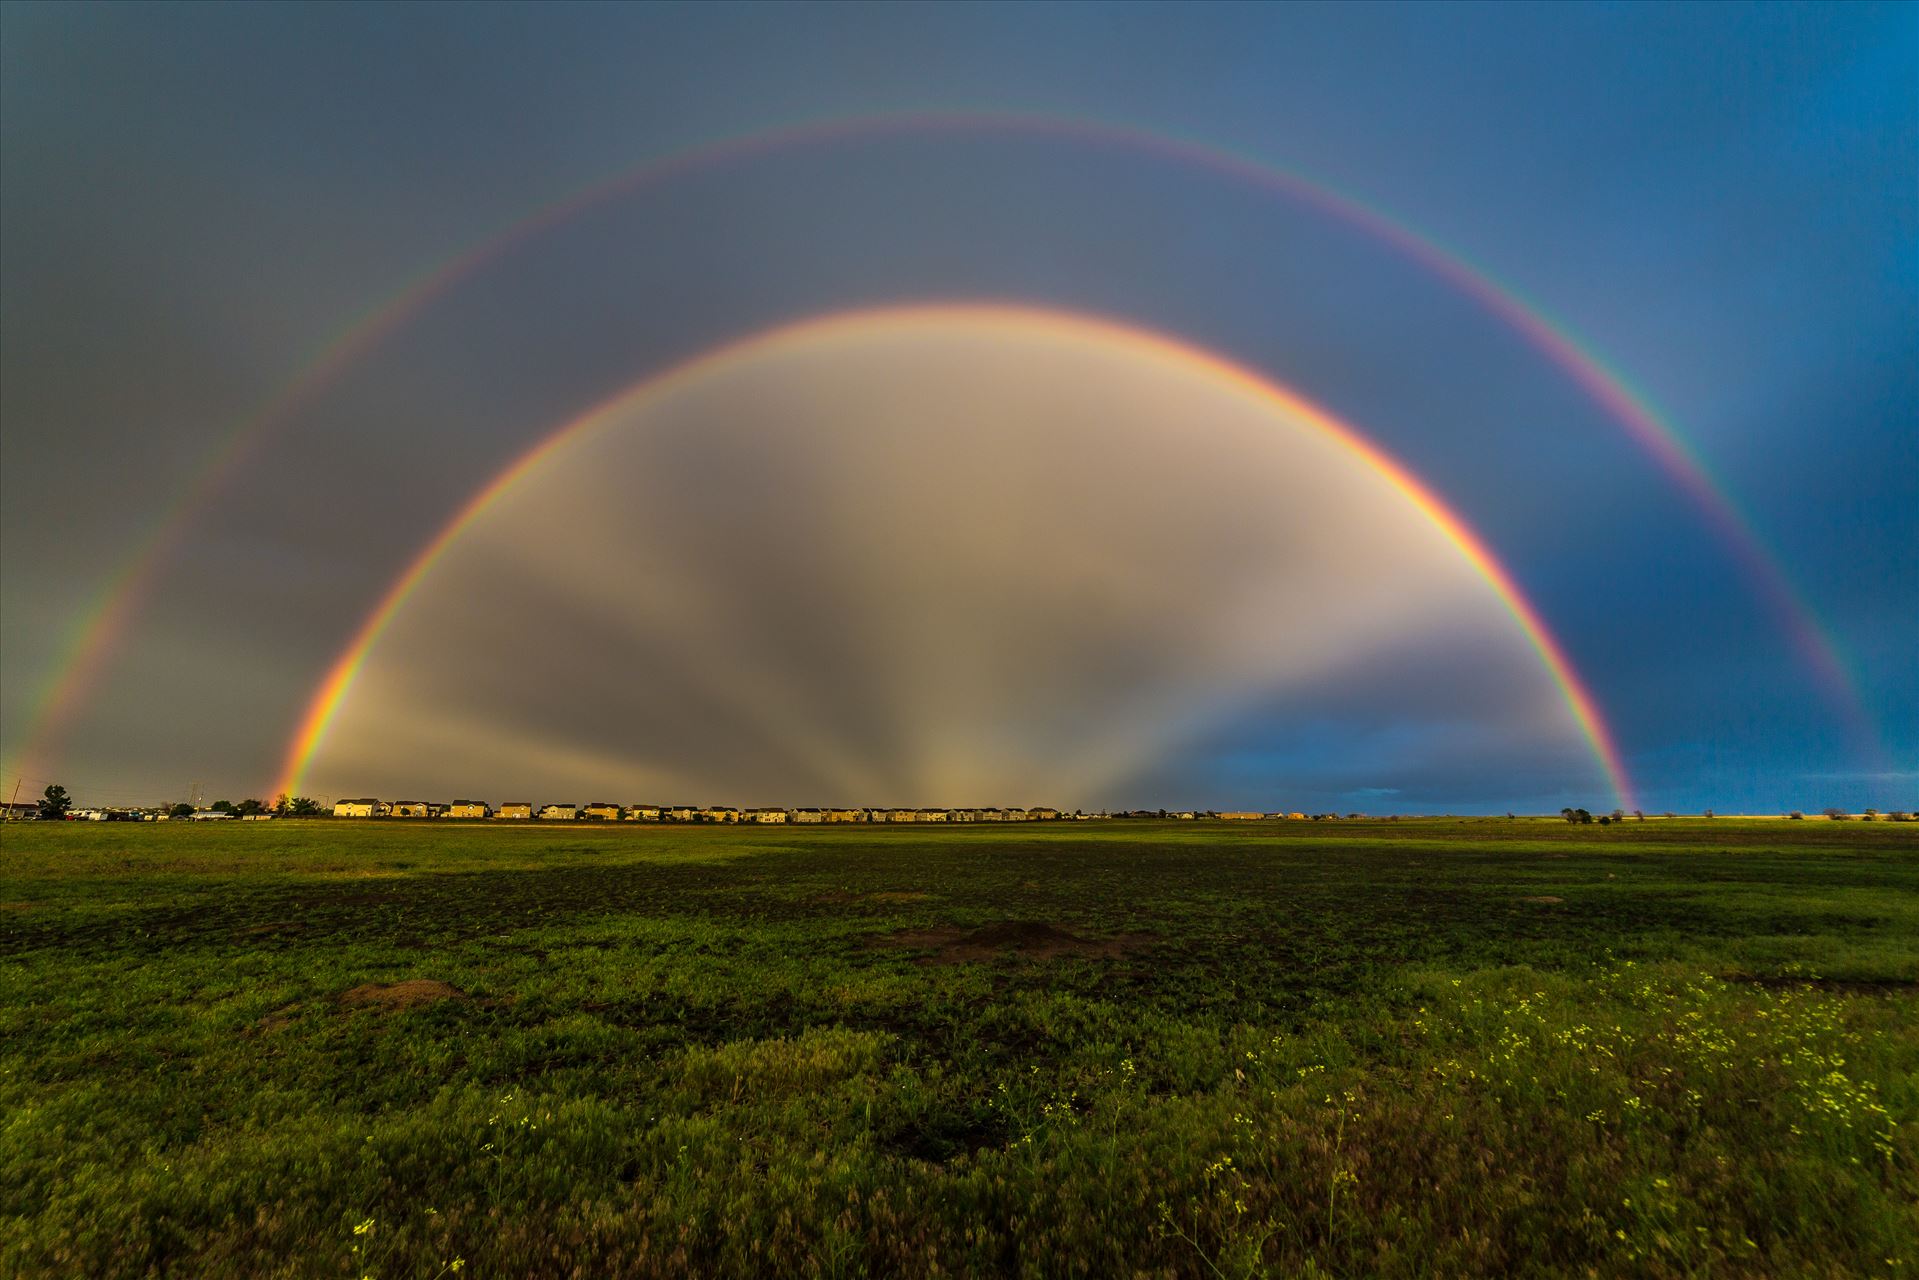 Double Rainbow with Anti-Crepuscular Rays After a hard rain and a bit of hail, anti-crepuscular rays appear to cast from the center of a double rainbow, near Reunion, Colorado. by Scott Smith Photos